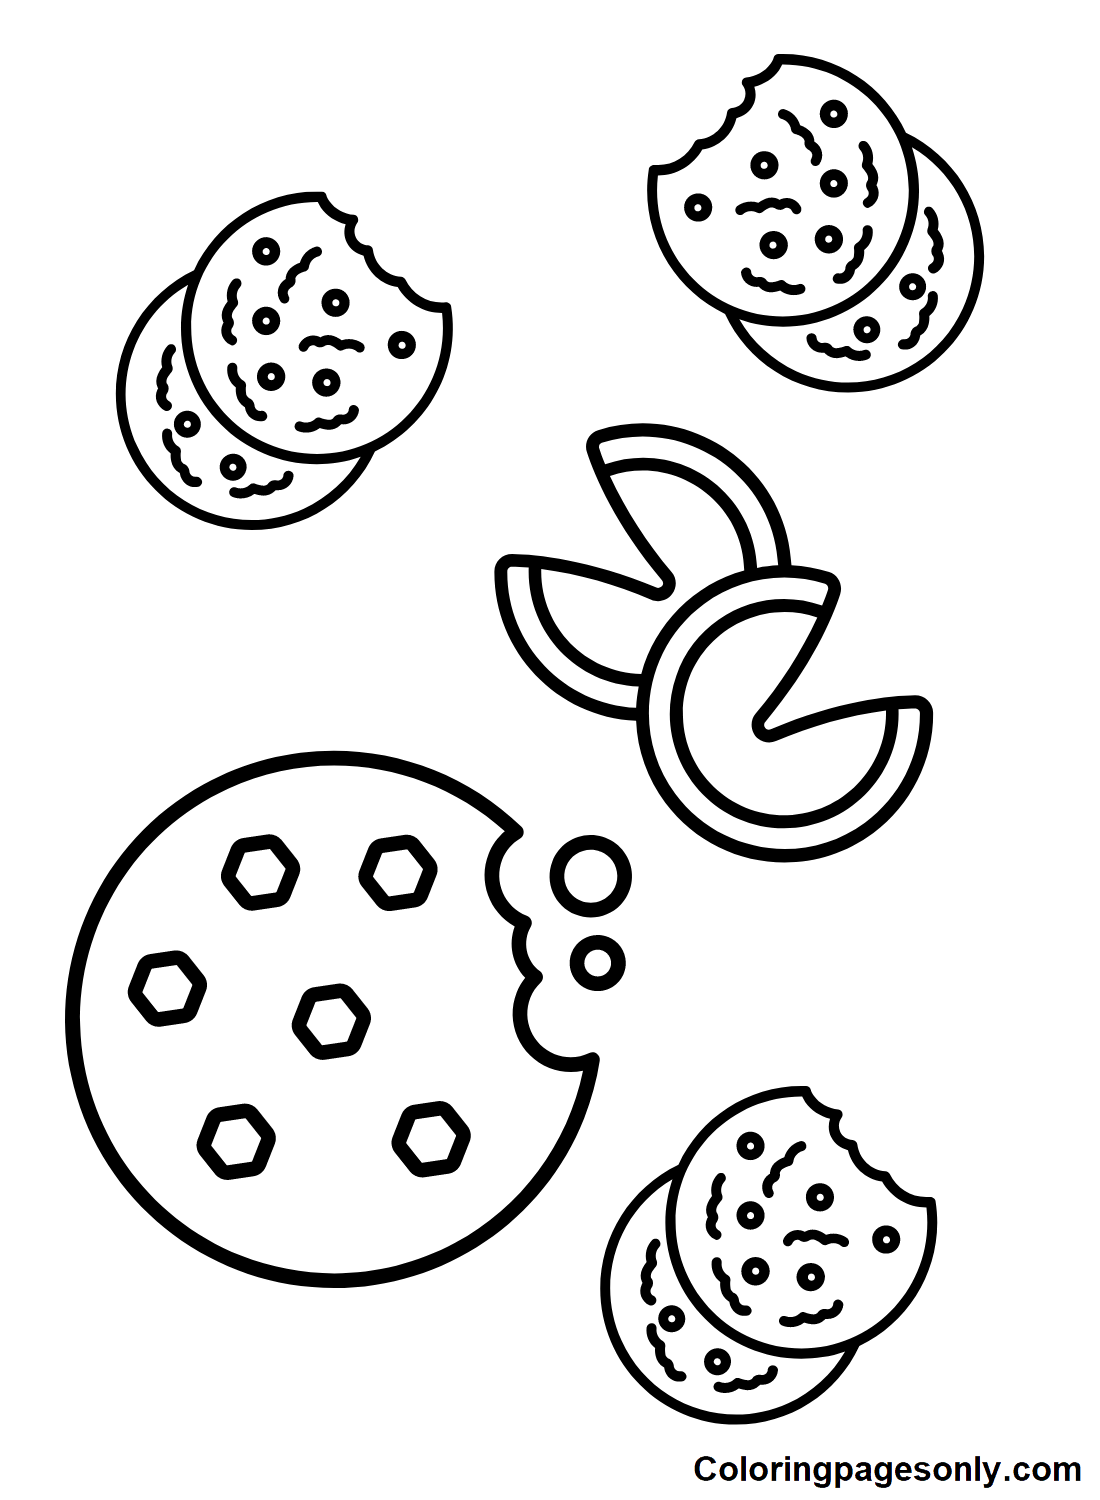 Cookie printable Coloring Pages